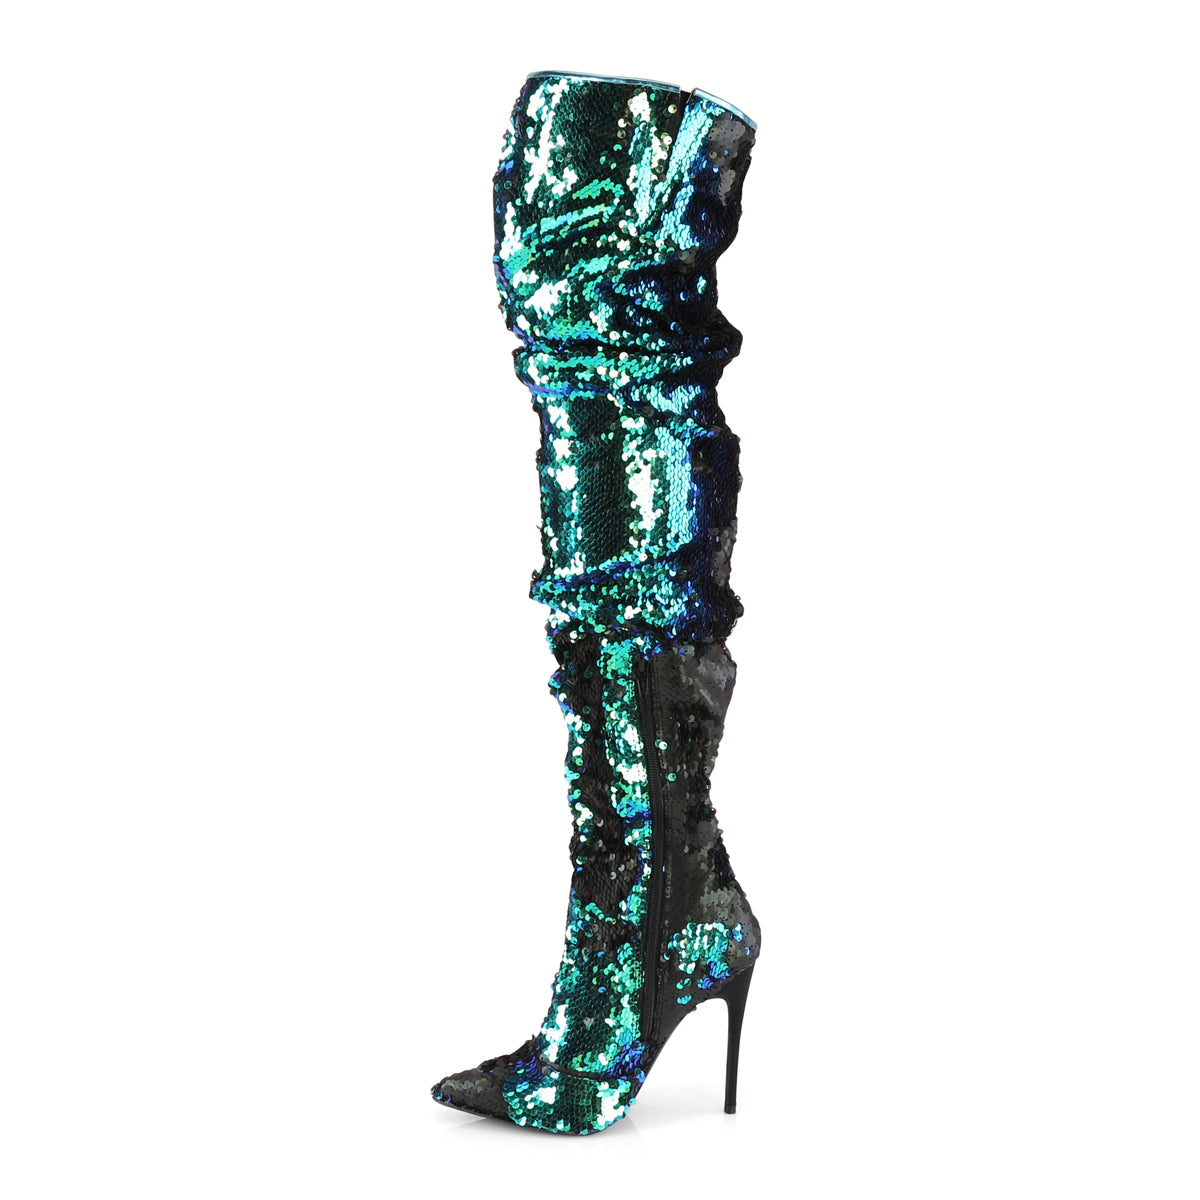 COURTLY-3011 5" Heel Green Iridescent Sequins Fetish Shoes-Pleaser- Sexy Shoes Pole Dance Heels